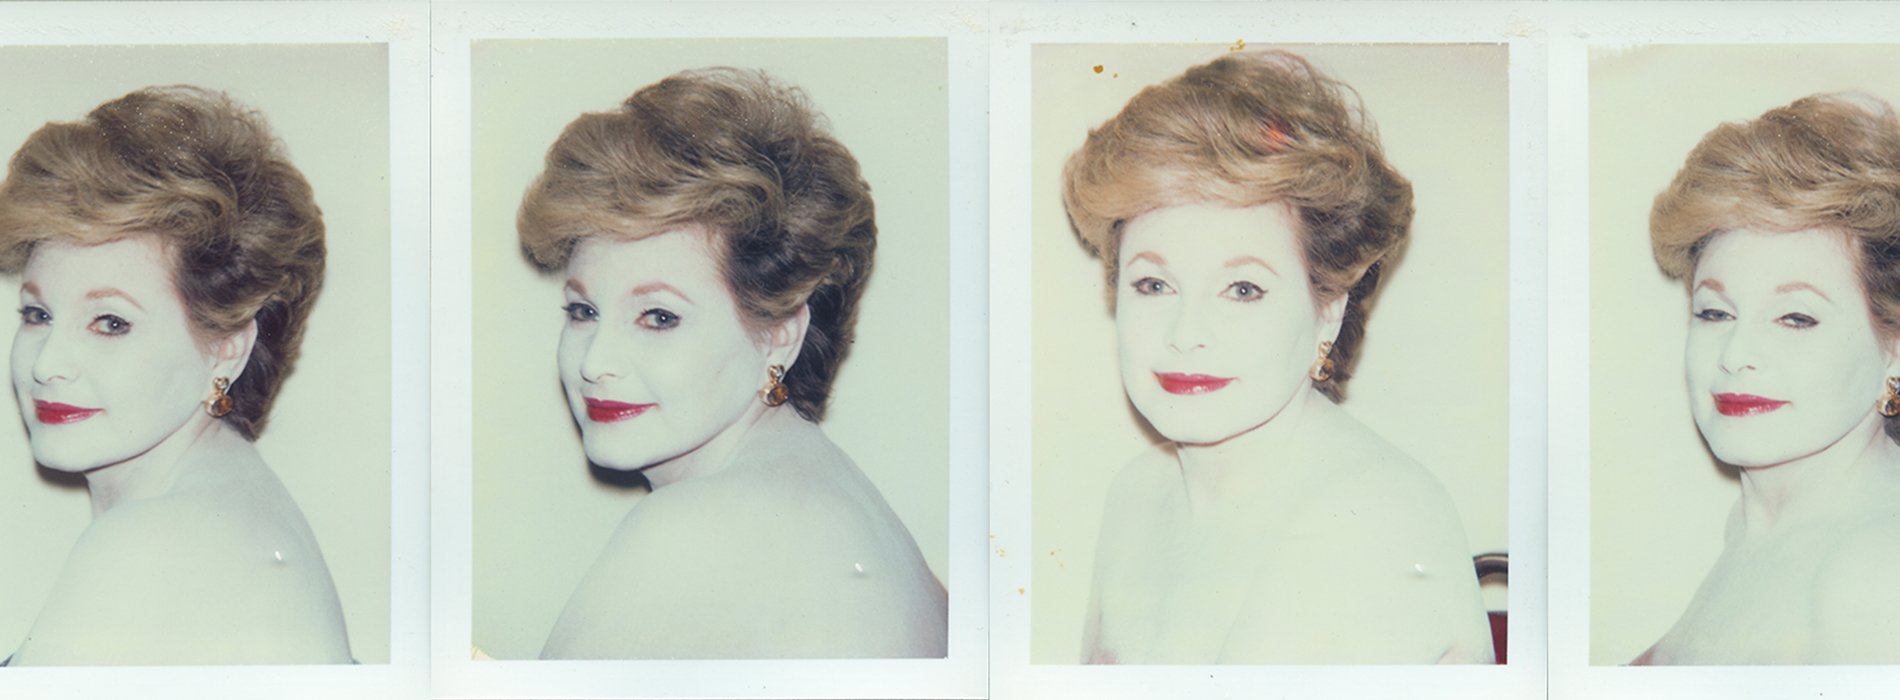 Polaroids of middle-aged woman with short hair and red lipstick